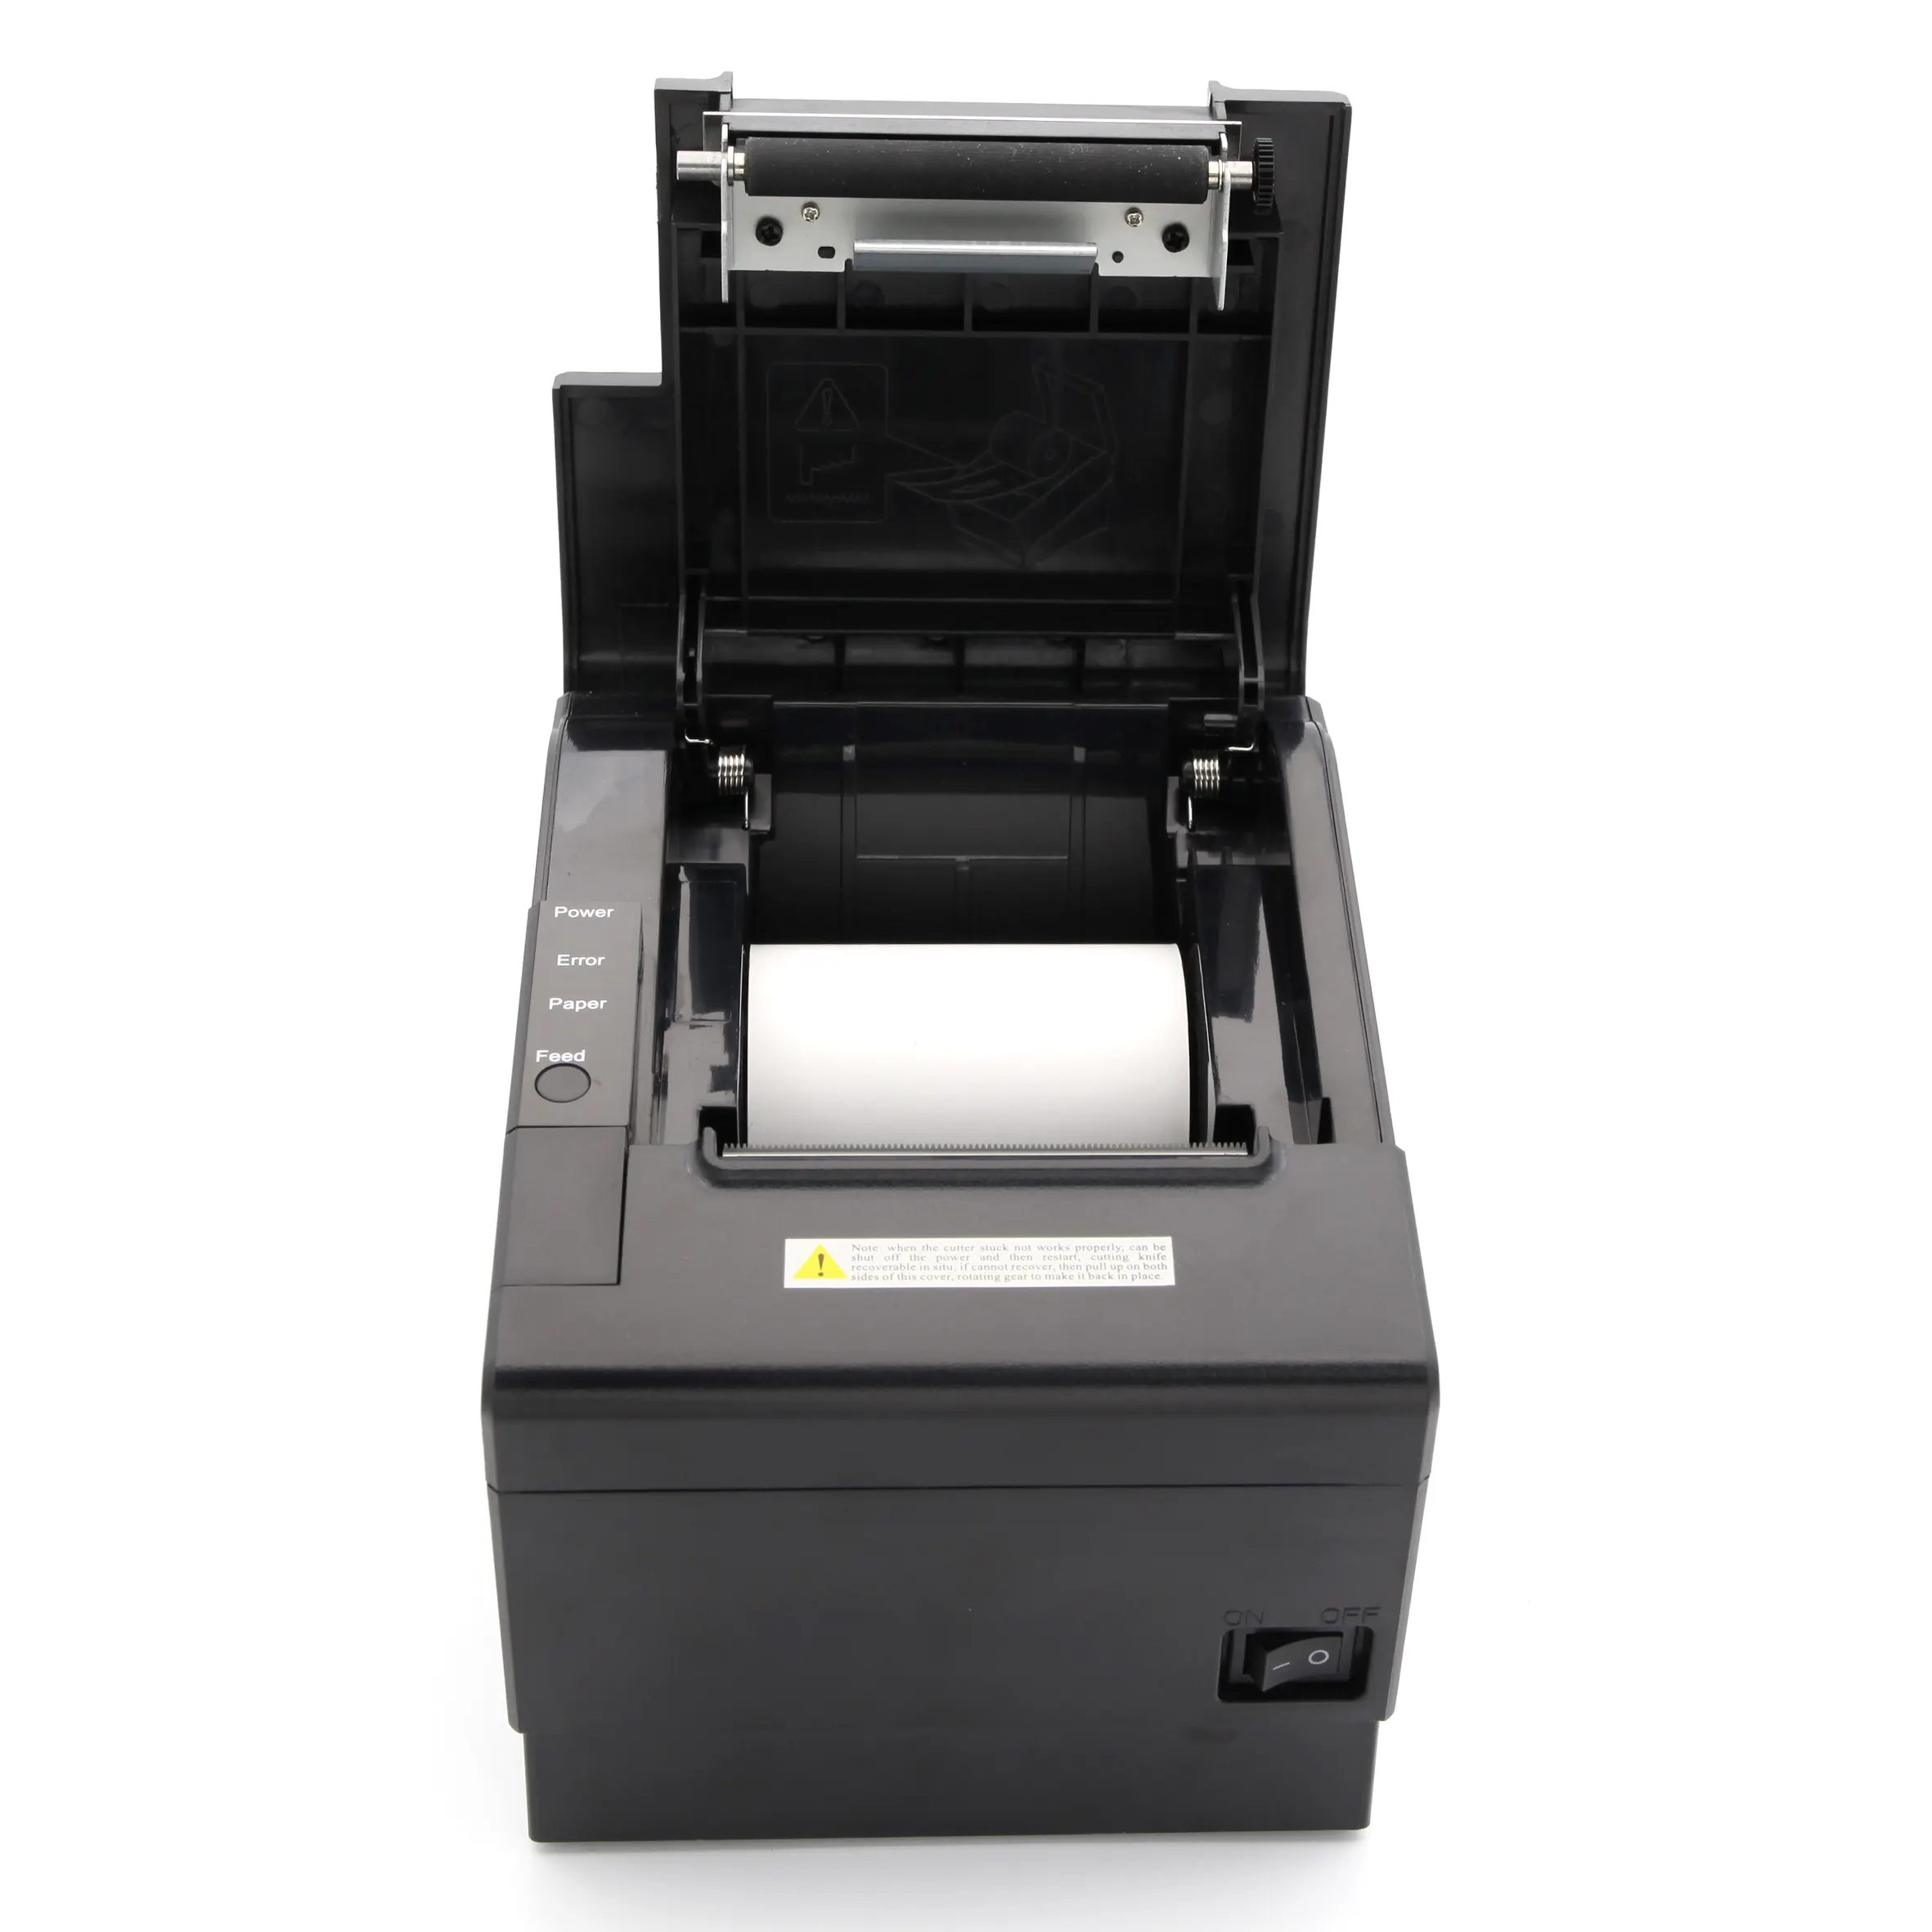 80mm free download with USB port 3inch ticket printer offer pos 80 printer Thermal Receipt Printer